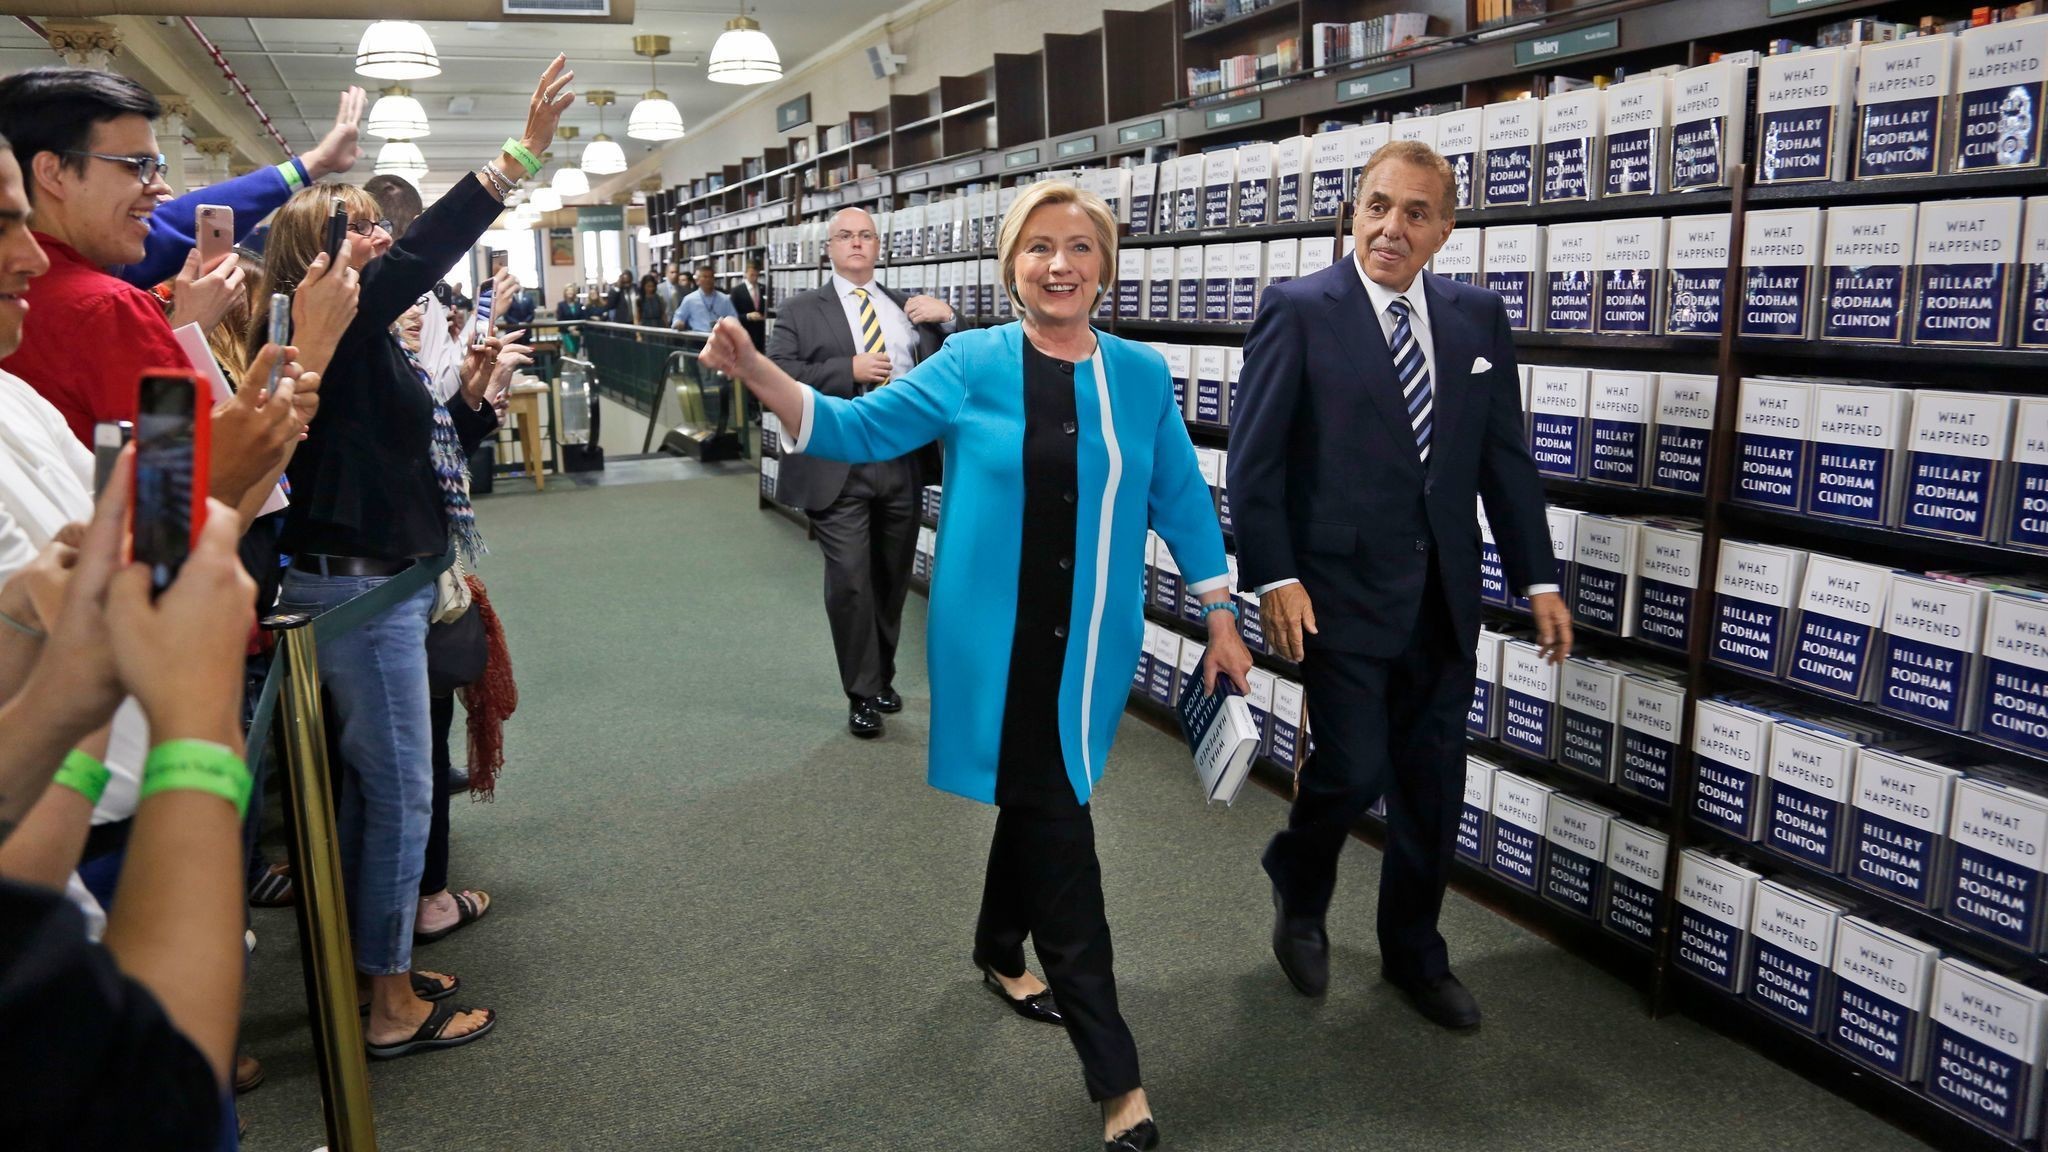 2048x1152 Hillary Clinton, rehashing her loss in a new book, emerges to  less-than-enthusiastic reviews - LA Times